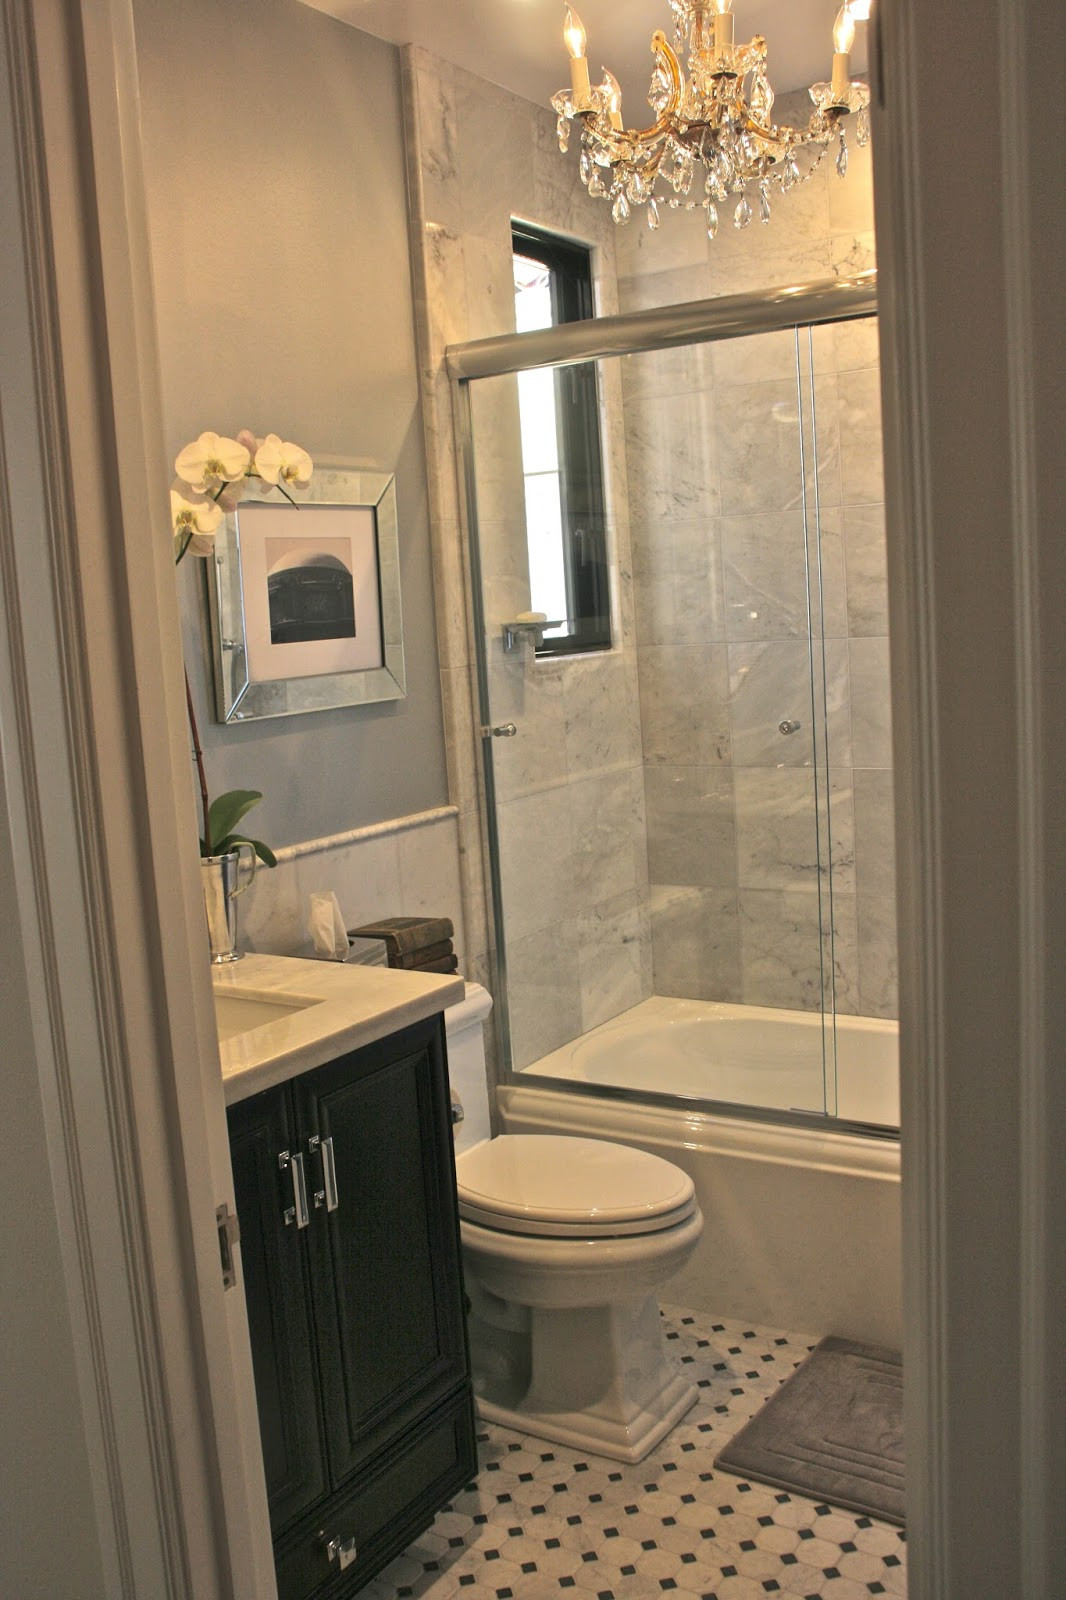 Small Bathroom Window Ideas
 vignette design A Night At The Boxwood House